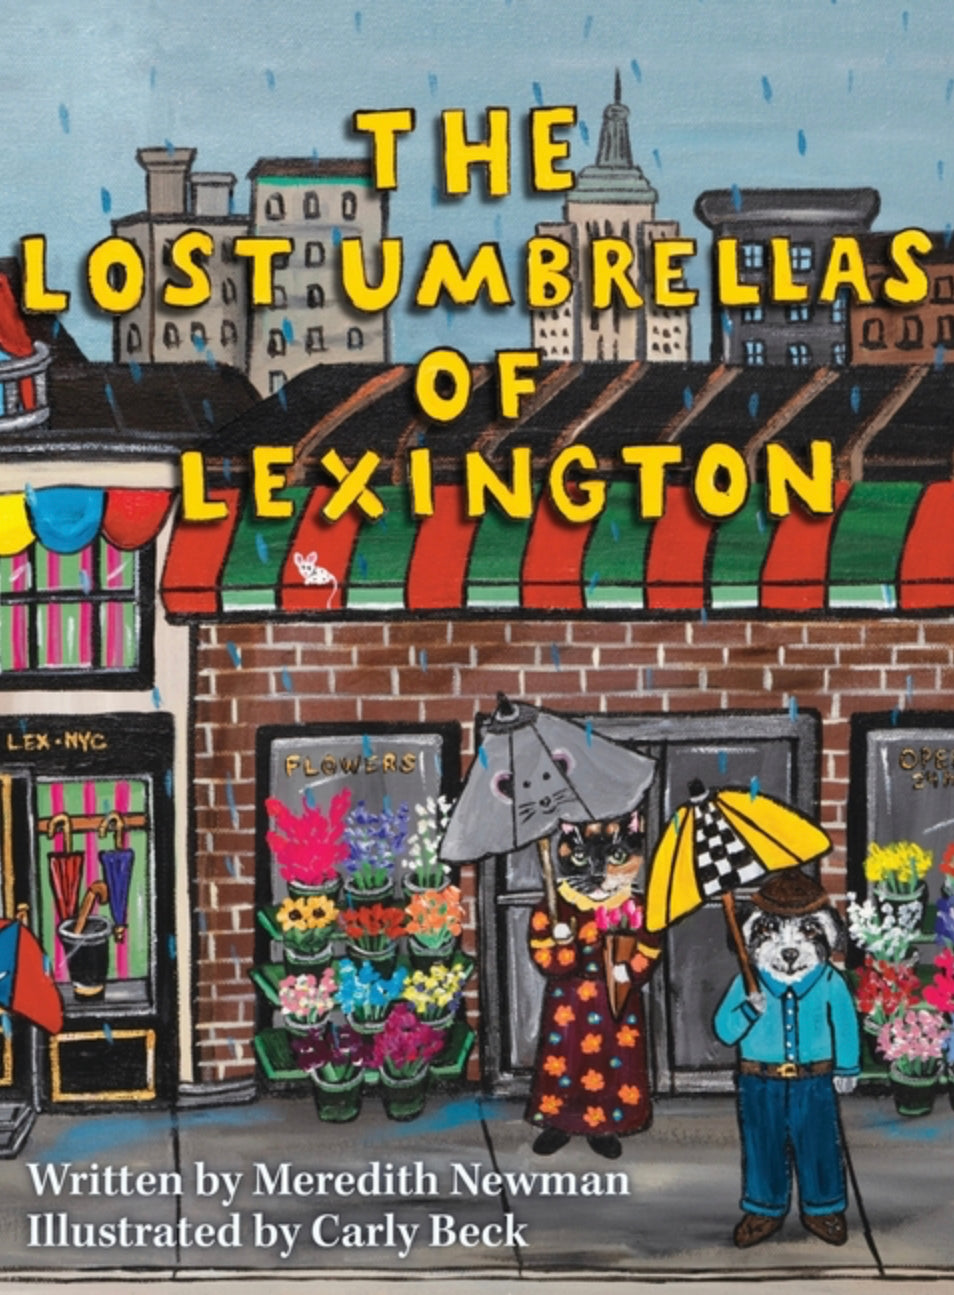 The Lost Umbrellas of Lexington, Meredith Newman and Carly Beck